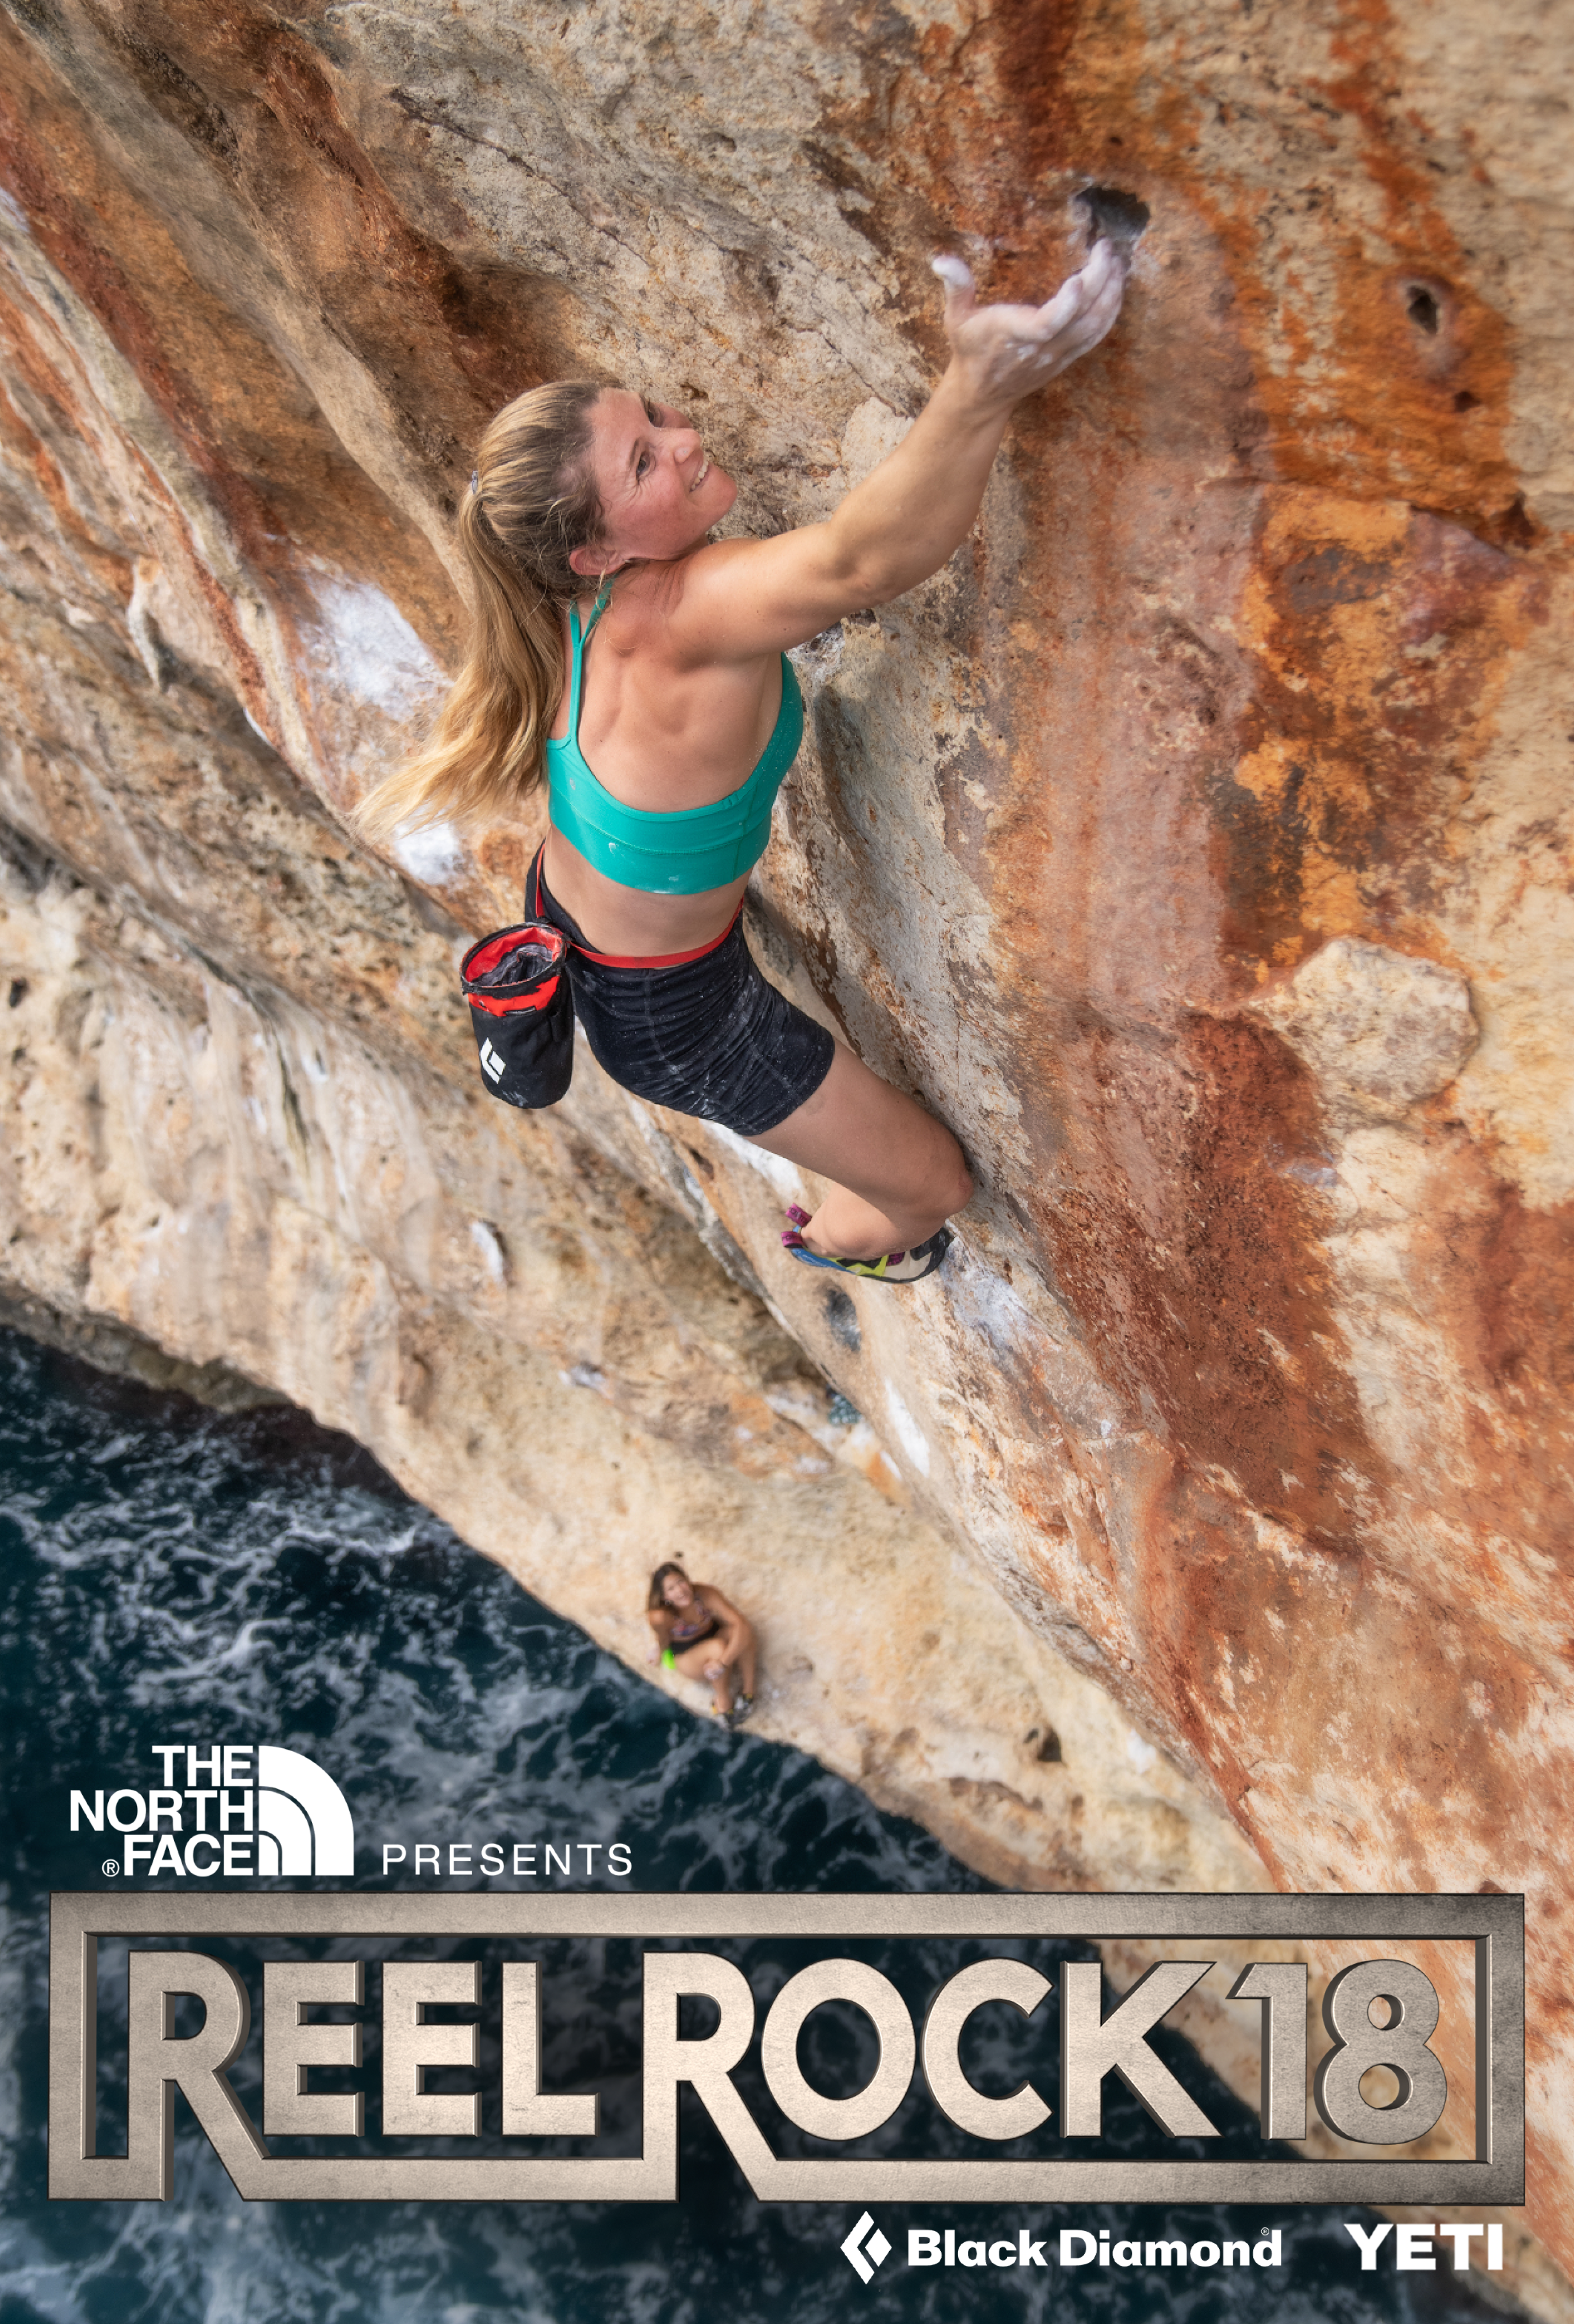 An image of a woman rocking climbing. "Reel Rock 18" is titled at the bottom of the image.